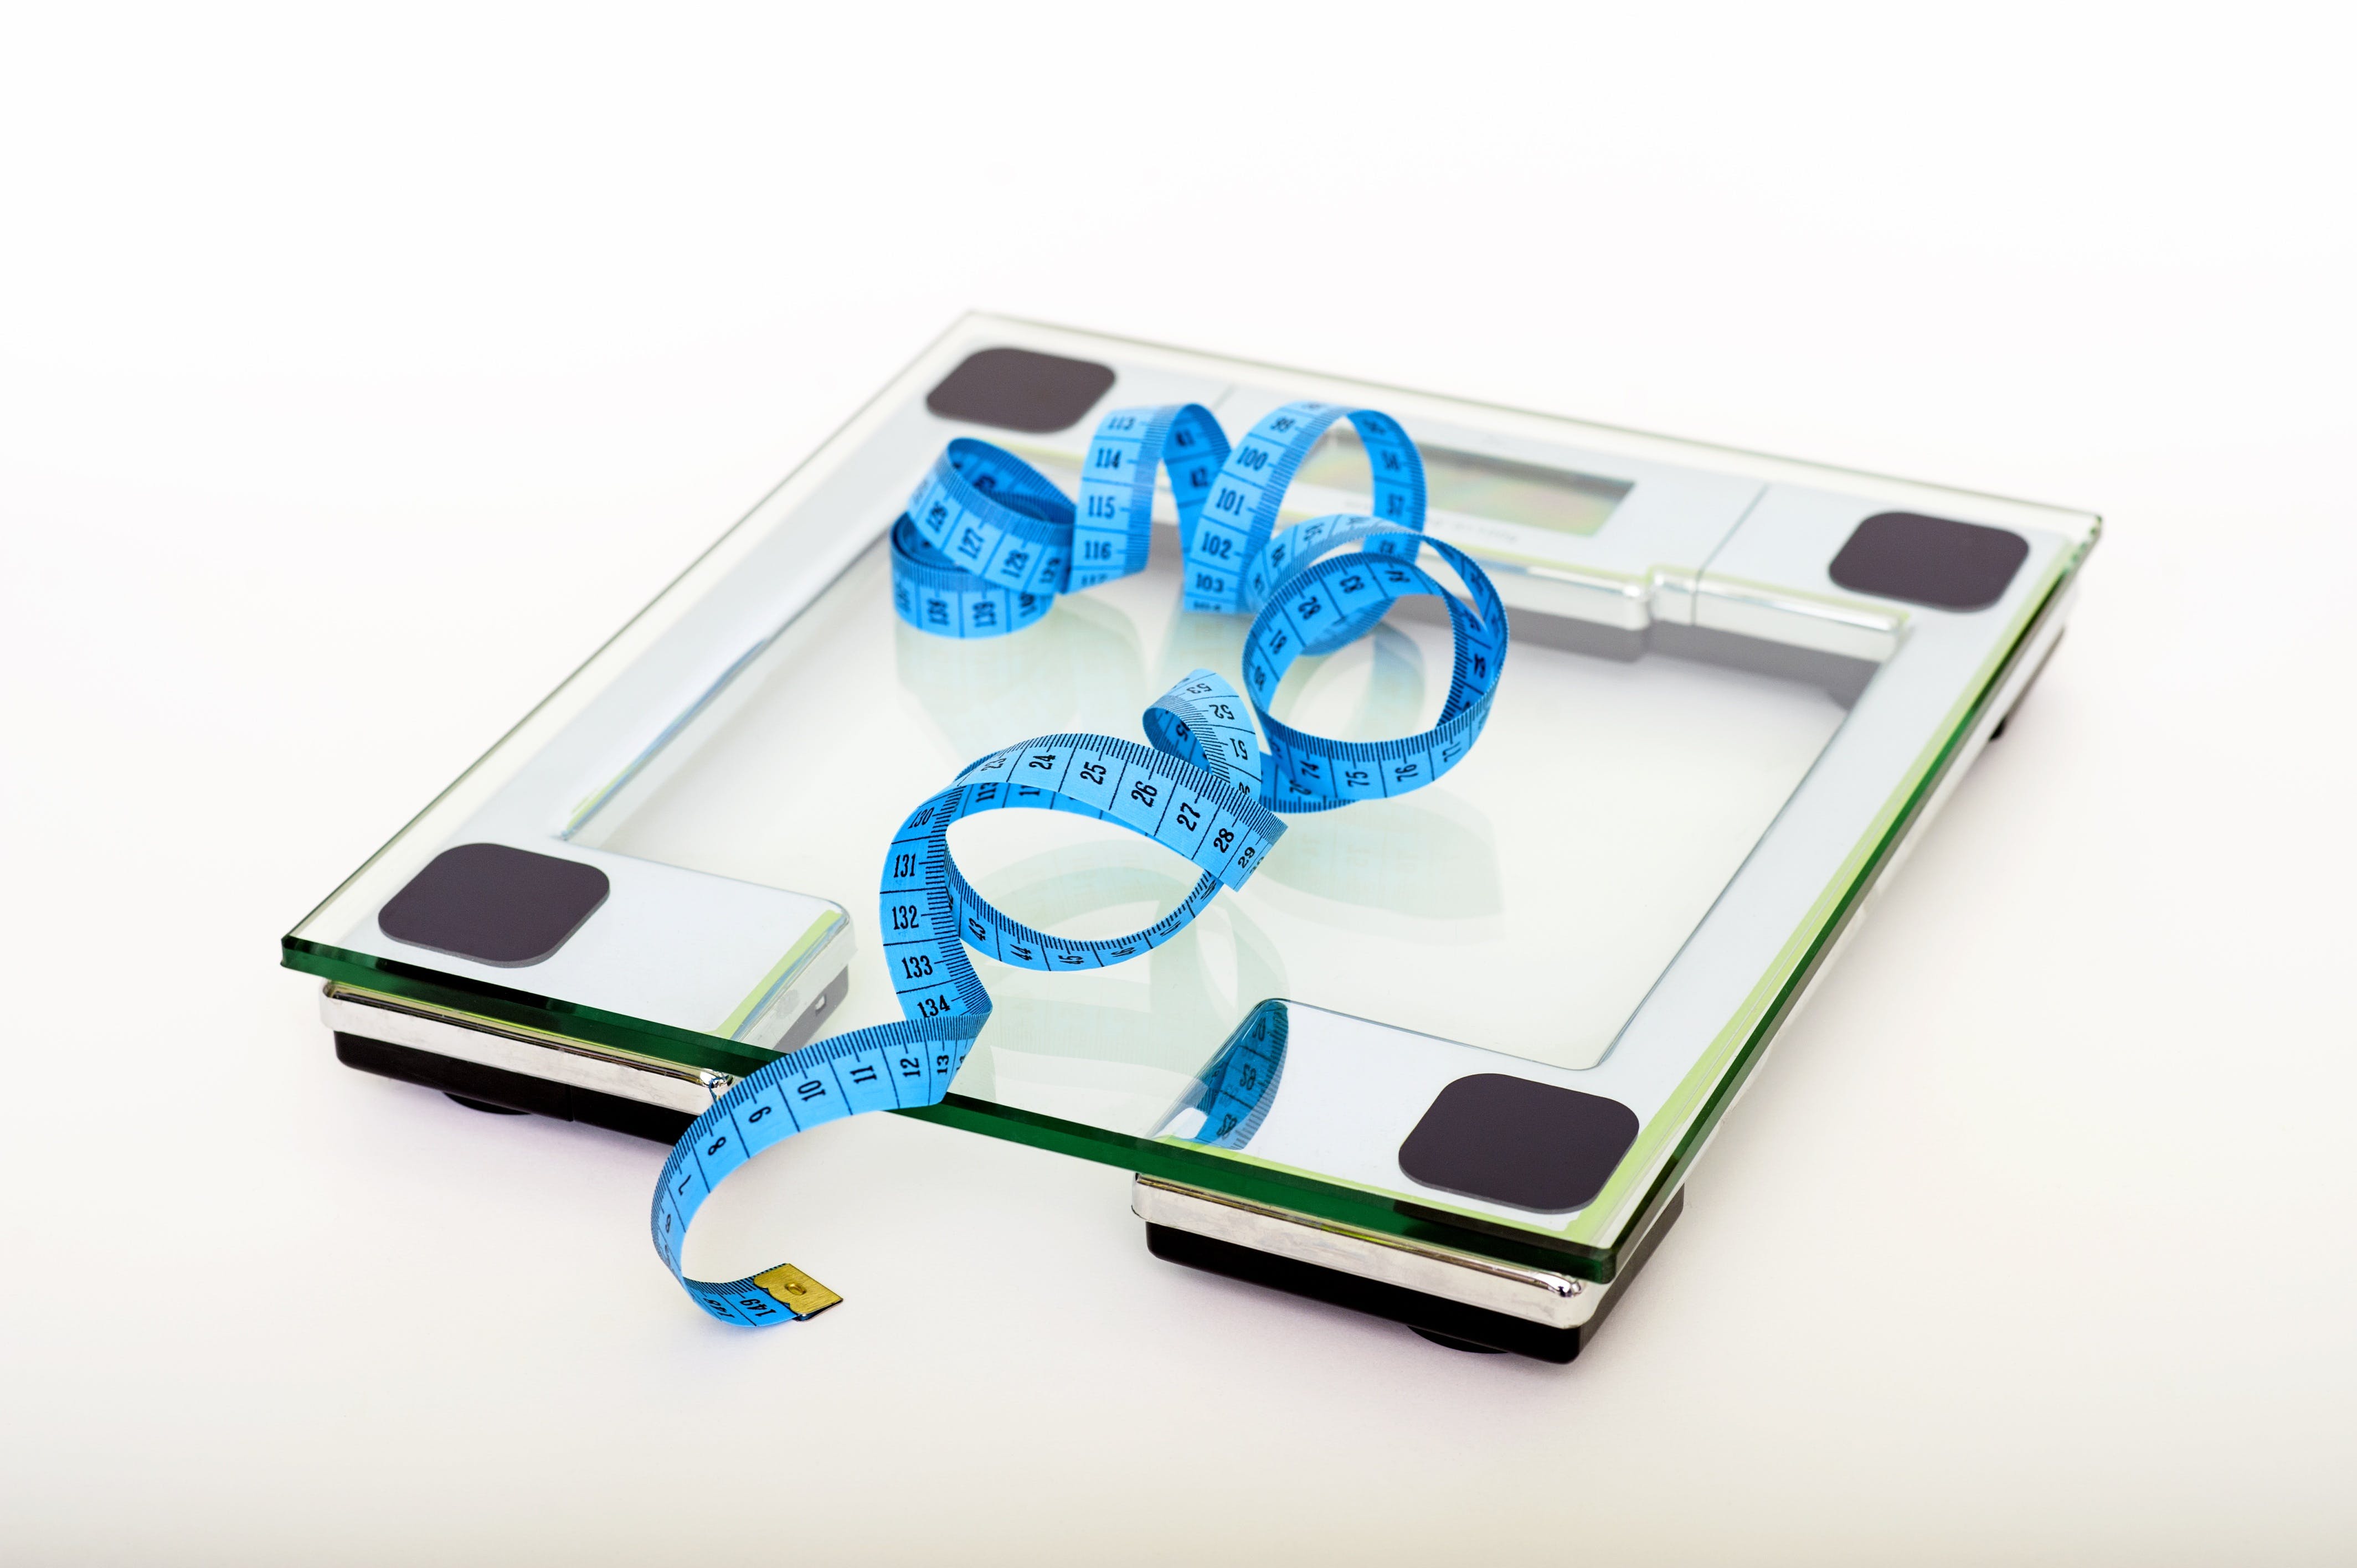 Weighing scale and tape measure | Source: Pexels